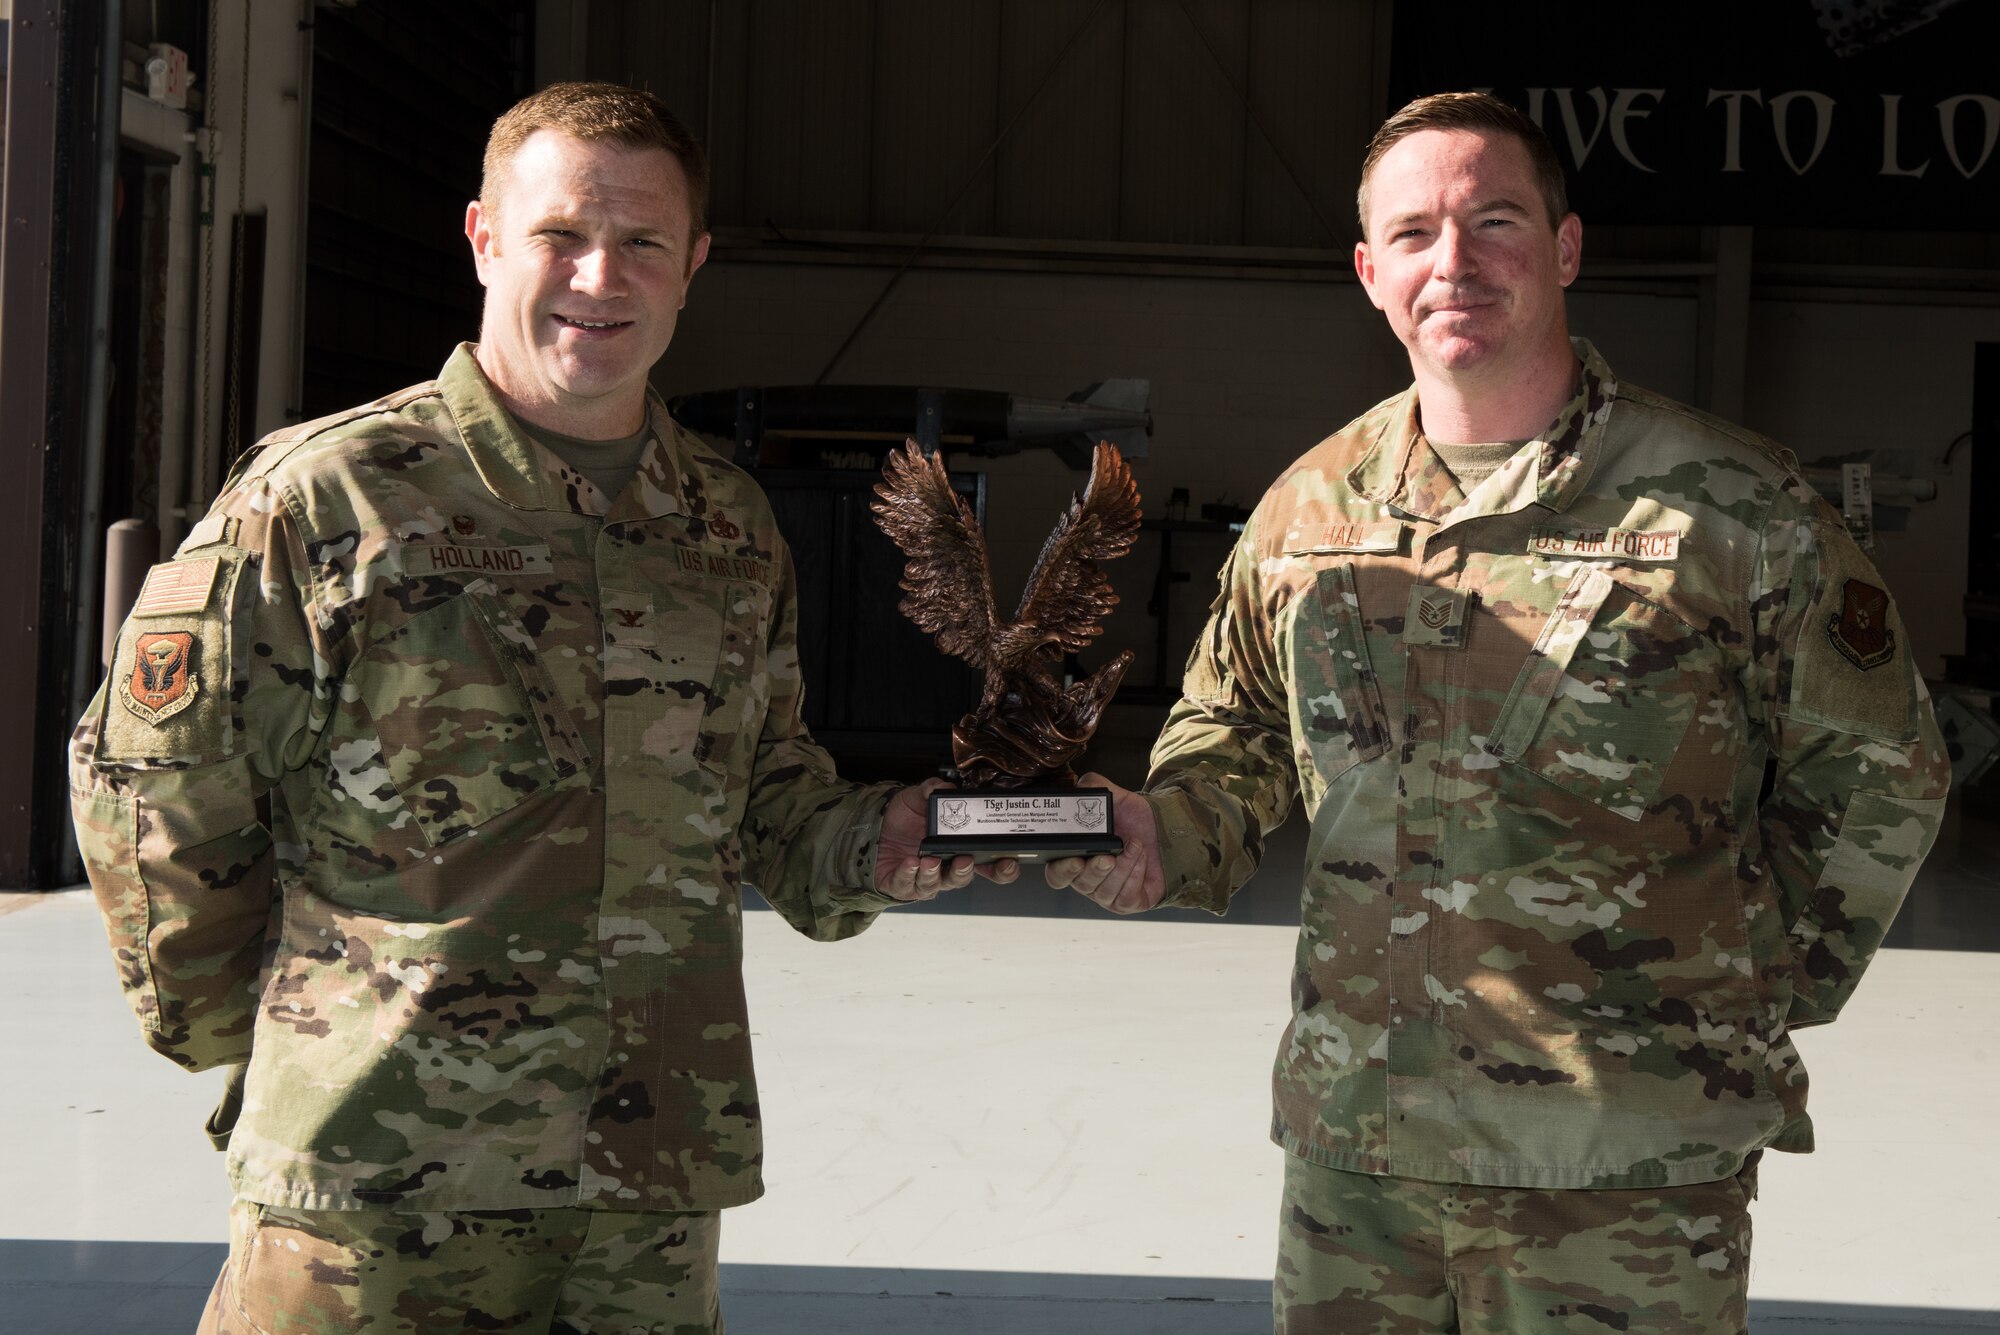 U.S. Air Force Col. Jeffrey Holland, 509th Maintenance Group commander, left, and Tech. Sgt. Justin Hall, 509th MXG loading standardization crew member, right, stands for photo with the Lt. Gen. Leo Marquez Award at Whiteman Air Force Base, Missouri, Aug. 14, 2020. Hall won the award of Technician Supervisor Category NCO Munitions/Missile Maintenance. This award recognizes military and civil service aircraft, munitions, and missile maintenance personnel who perform hands-on maintenance or manage a maintenance function. (U.S. Air Force photo by Airman 1st Class Christina Carter)